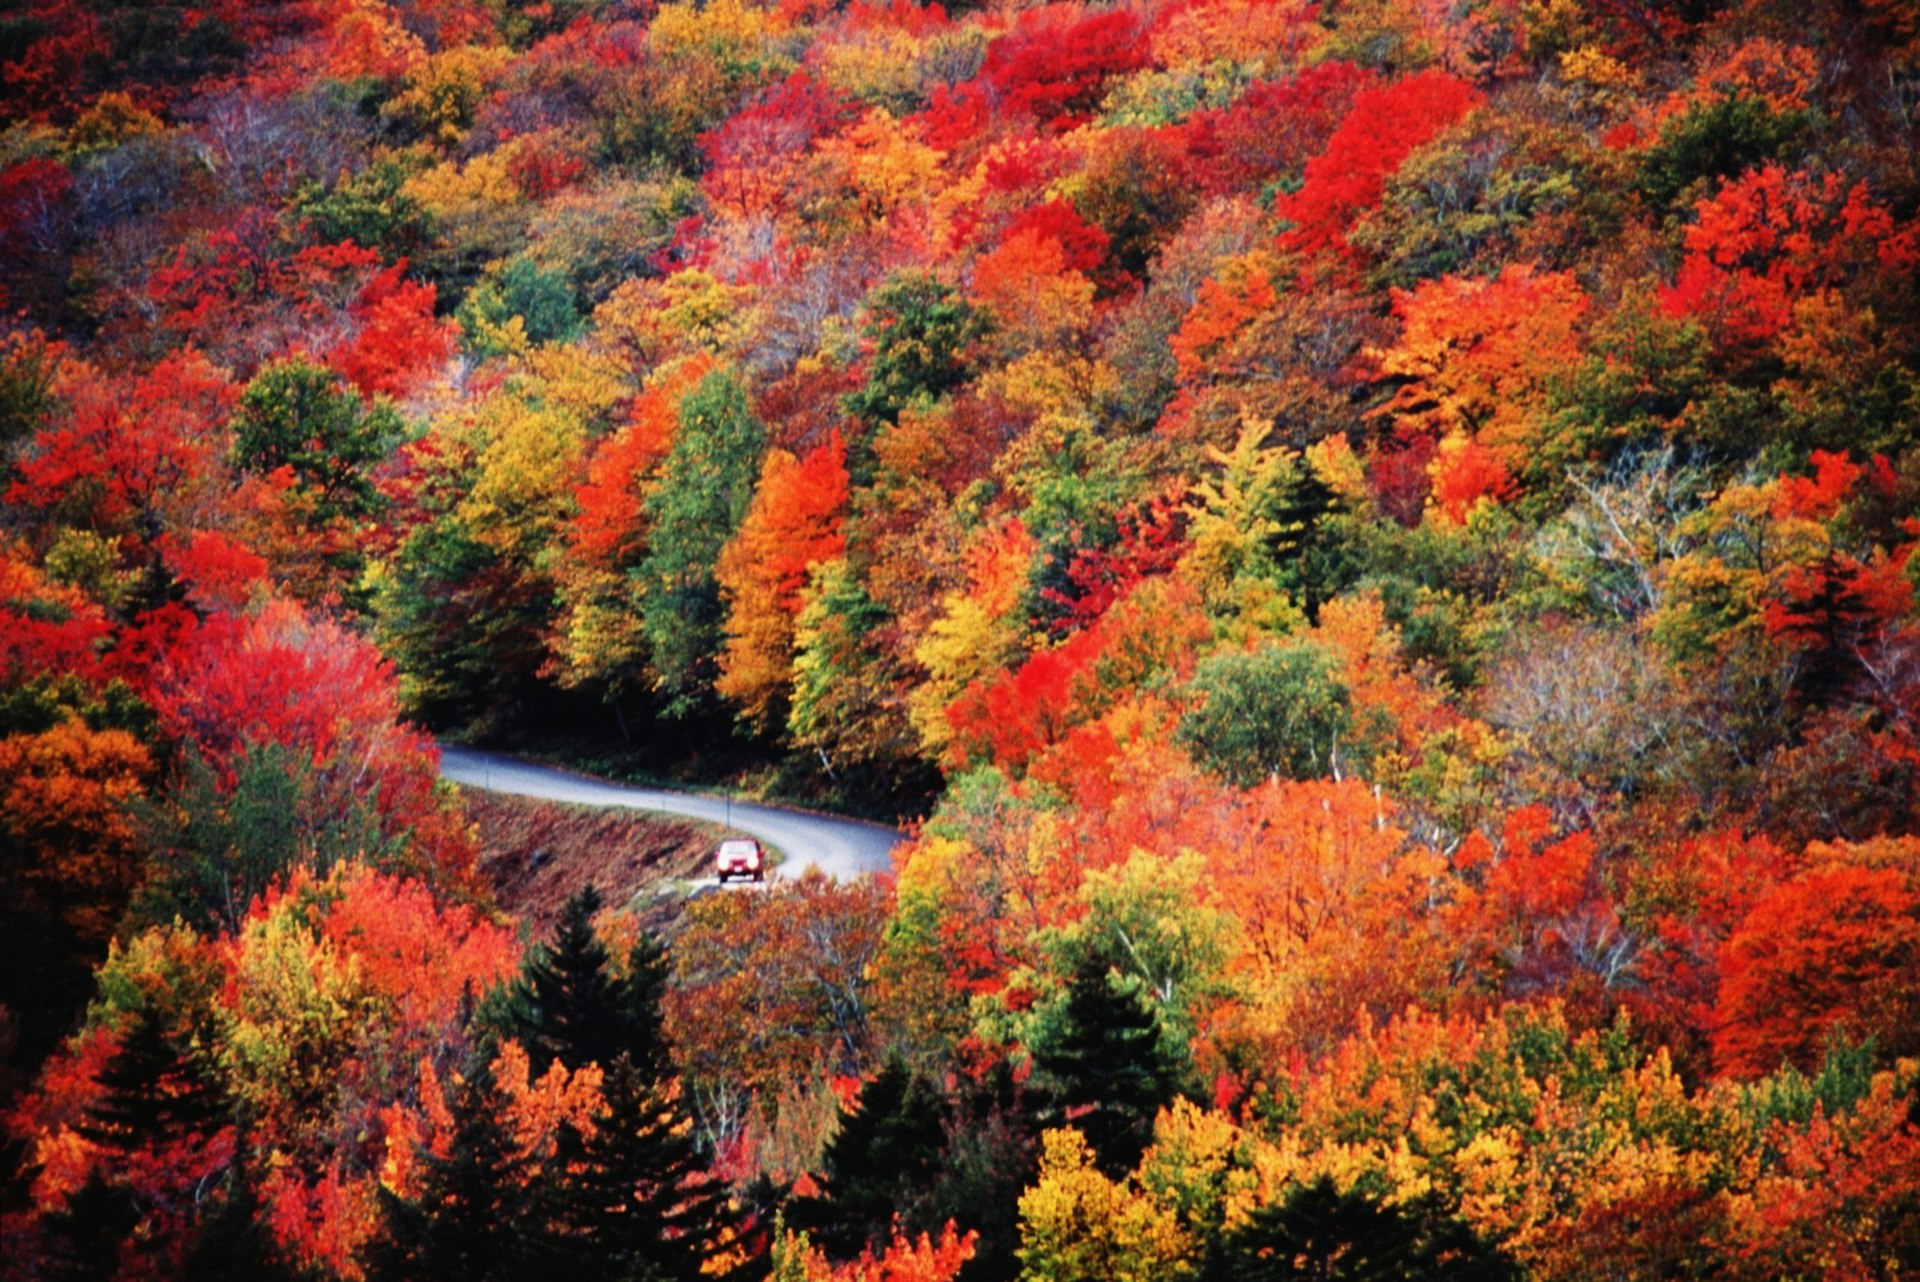 A car drives on a windy road that you can barely see because of the dense orange, red, yellow and green foliage while listening to audiobooks for a US road trip through small-town America. 